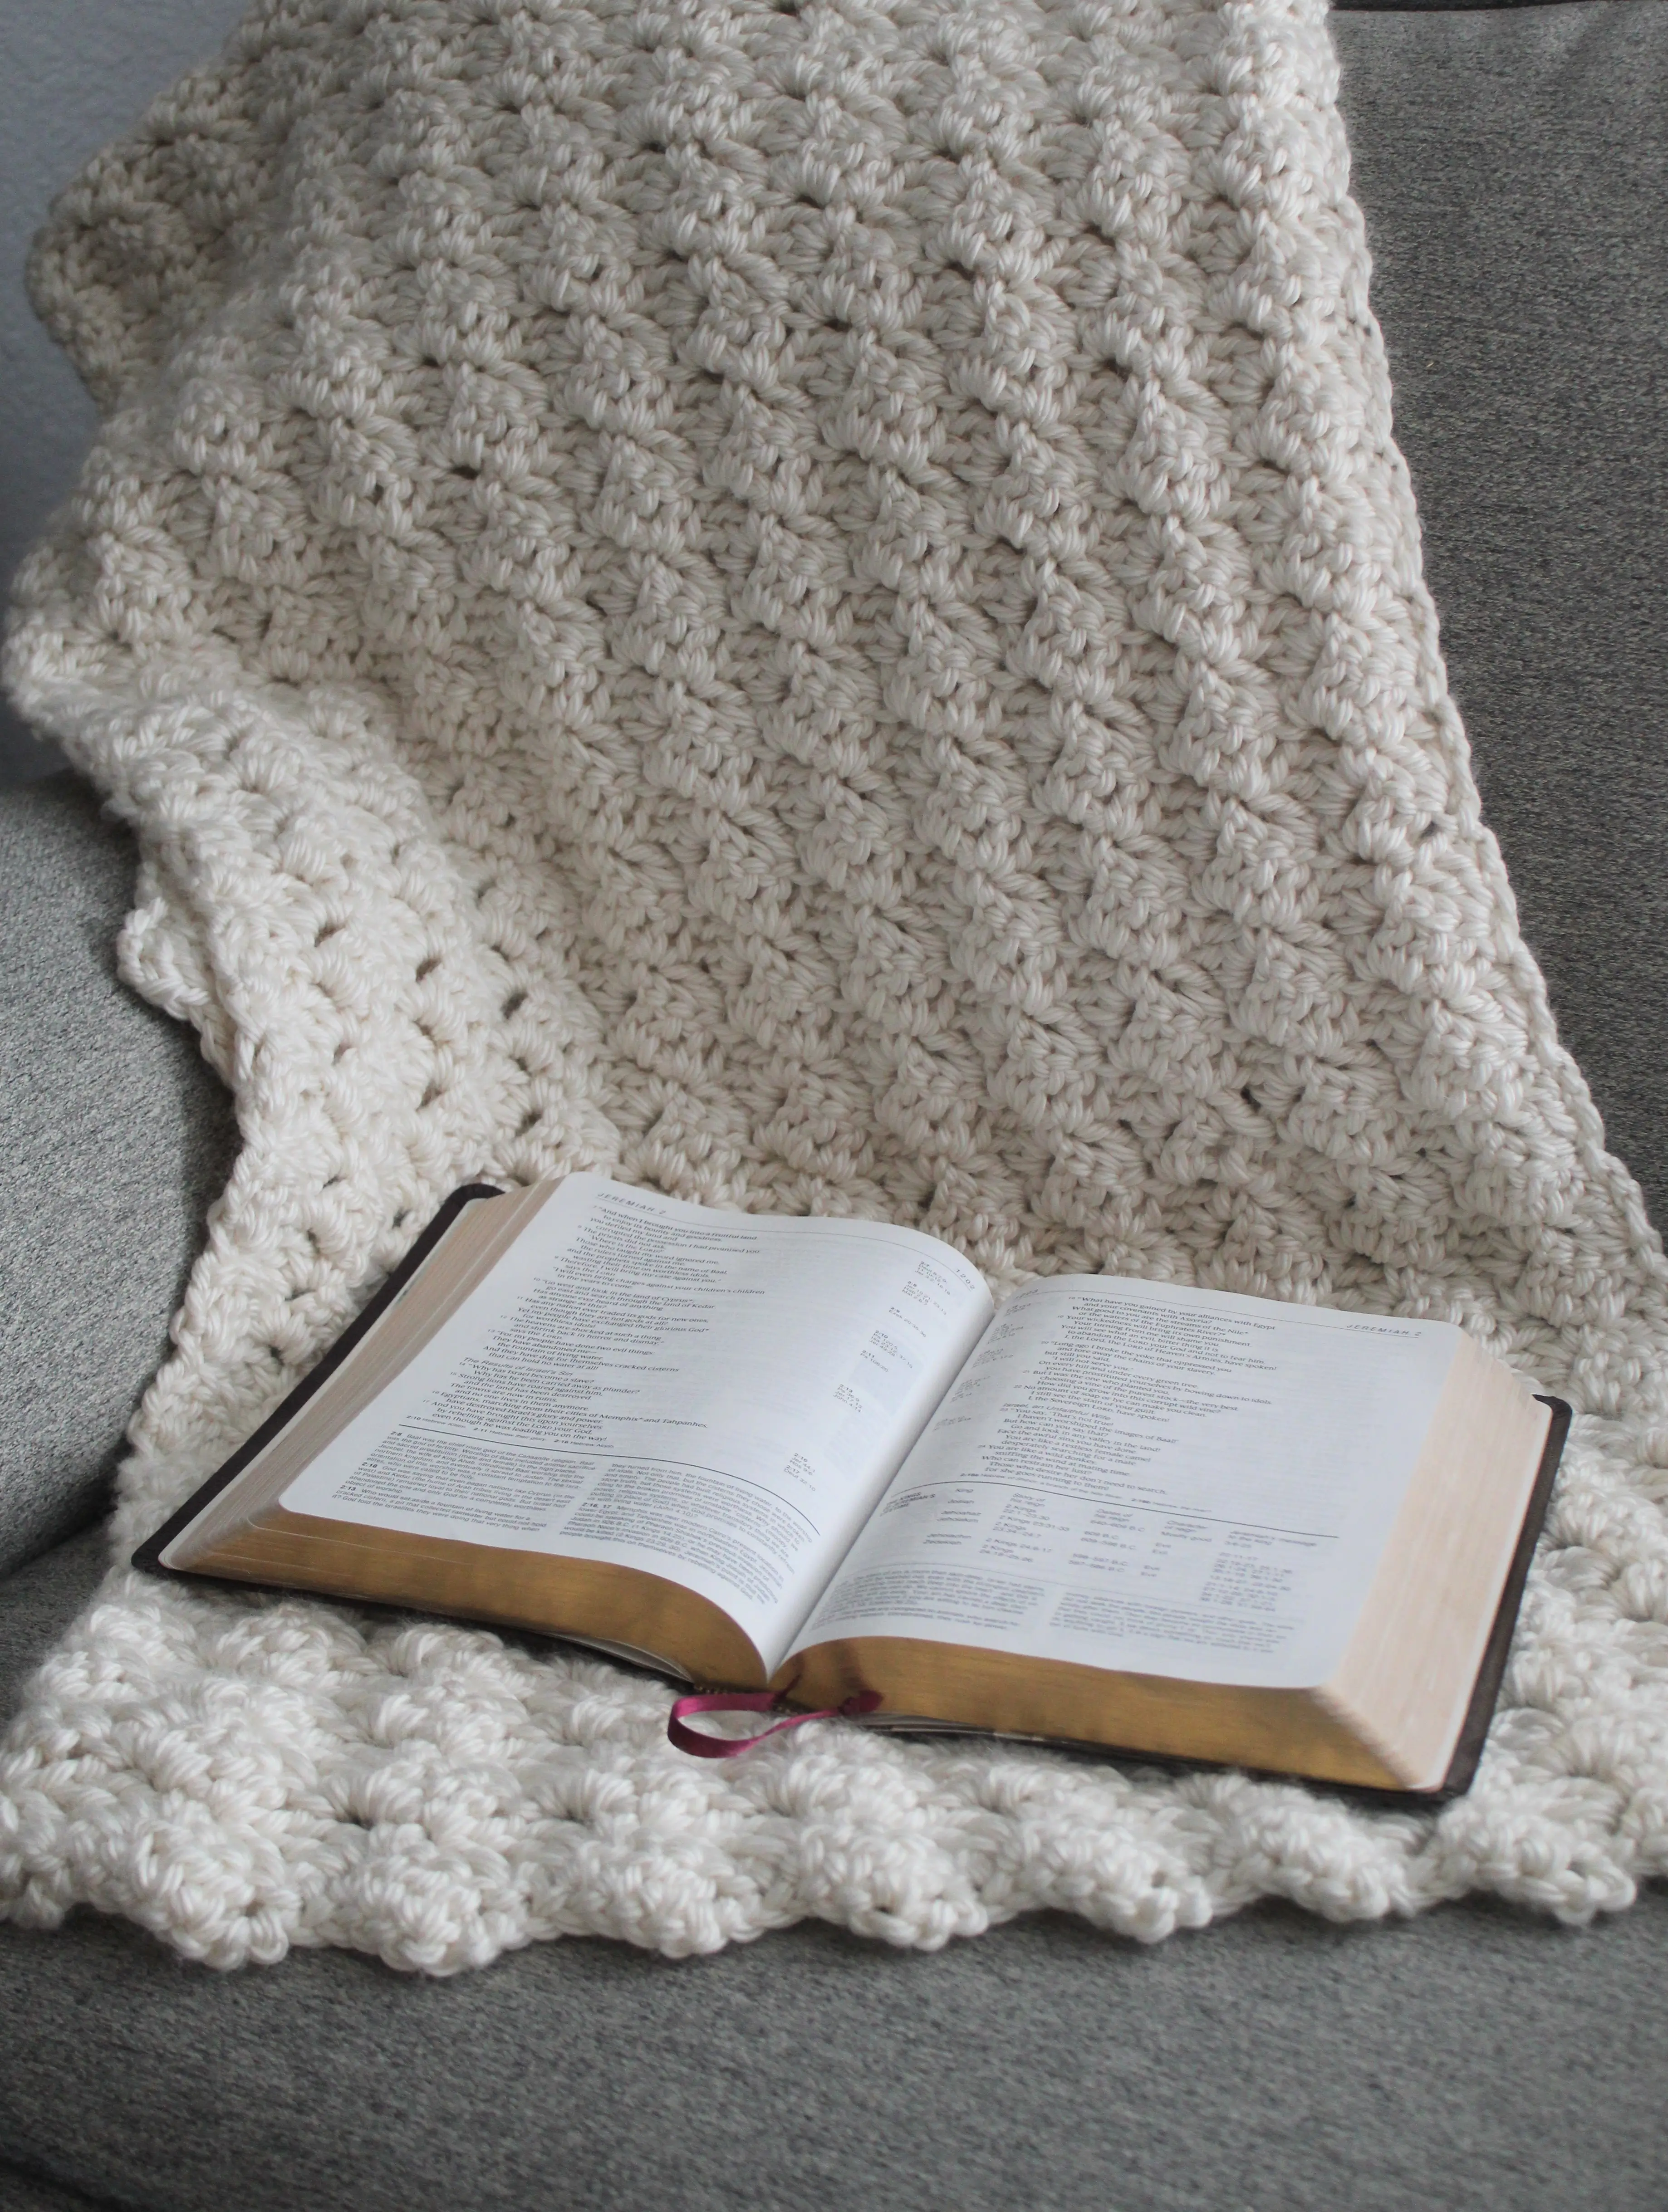 Slanted double crochet shawl in ivory crocheted shawl draped over a grey chair and an open bible on the shawl